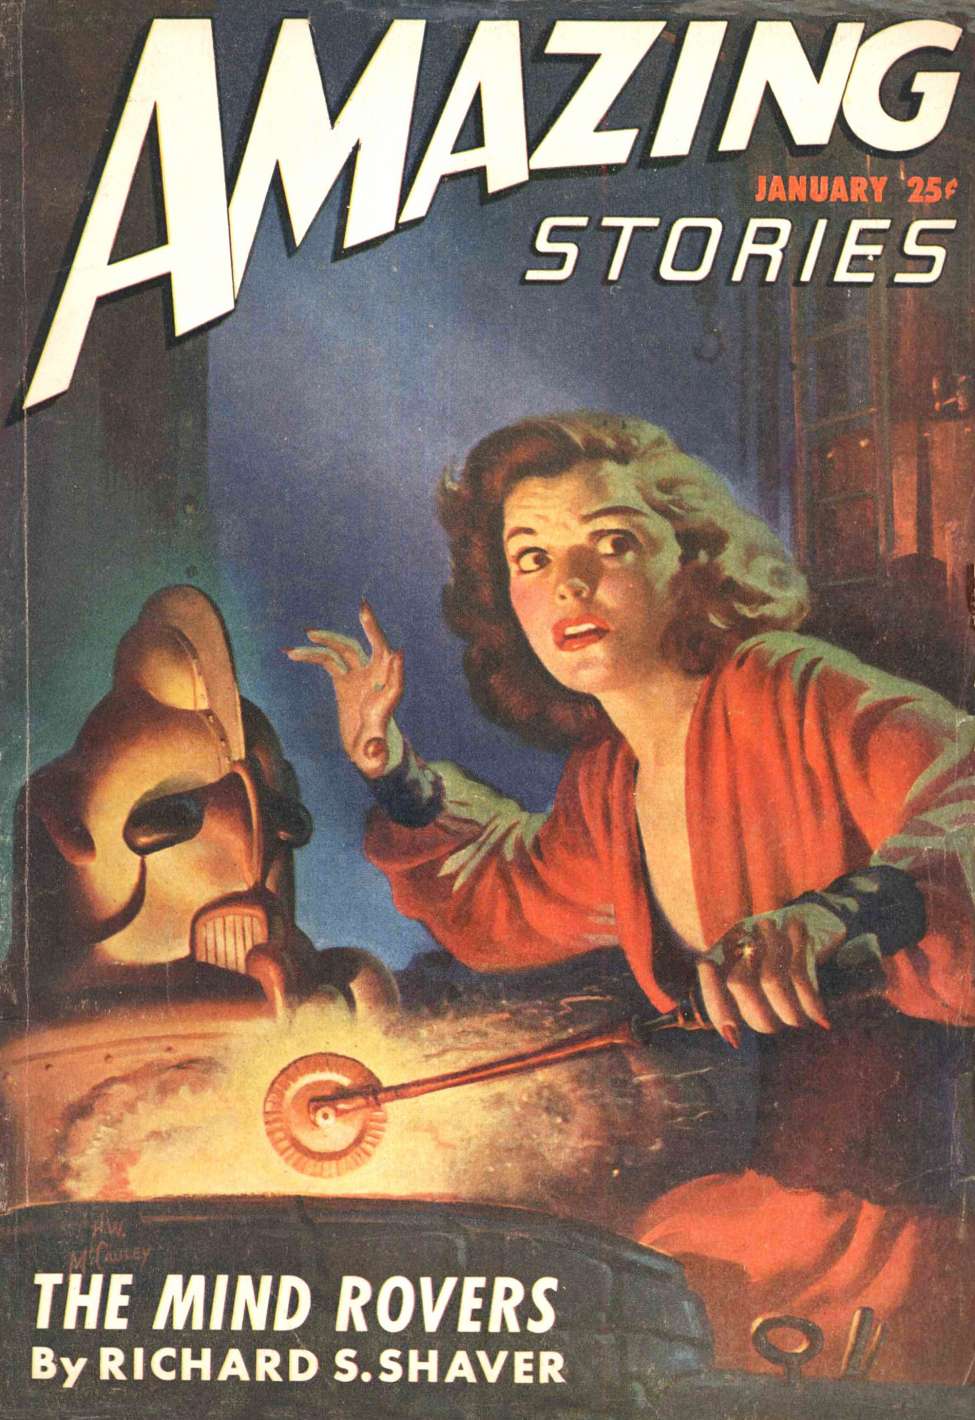 Comic Book Cover For Amazing Stories v21 1 - The Mind Rovers - Richard S. Shaver